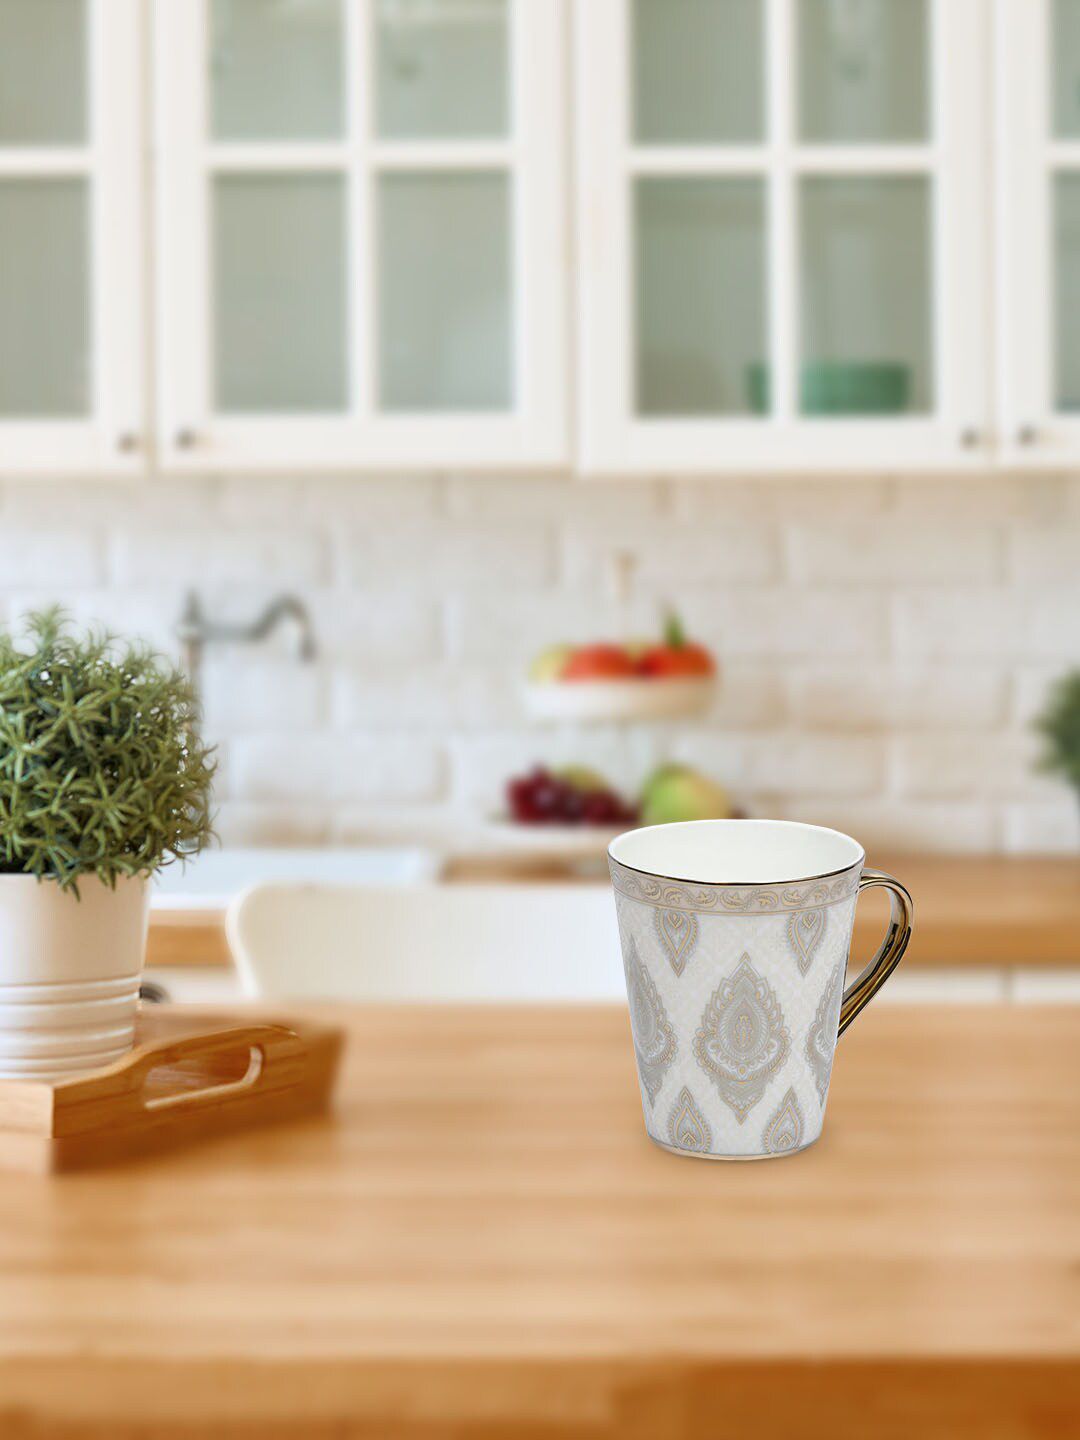 Athome by Nilkamal Gold-Toned & White Printed Ceramic Glossy Cup Price in India